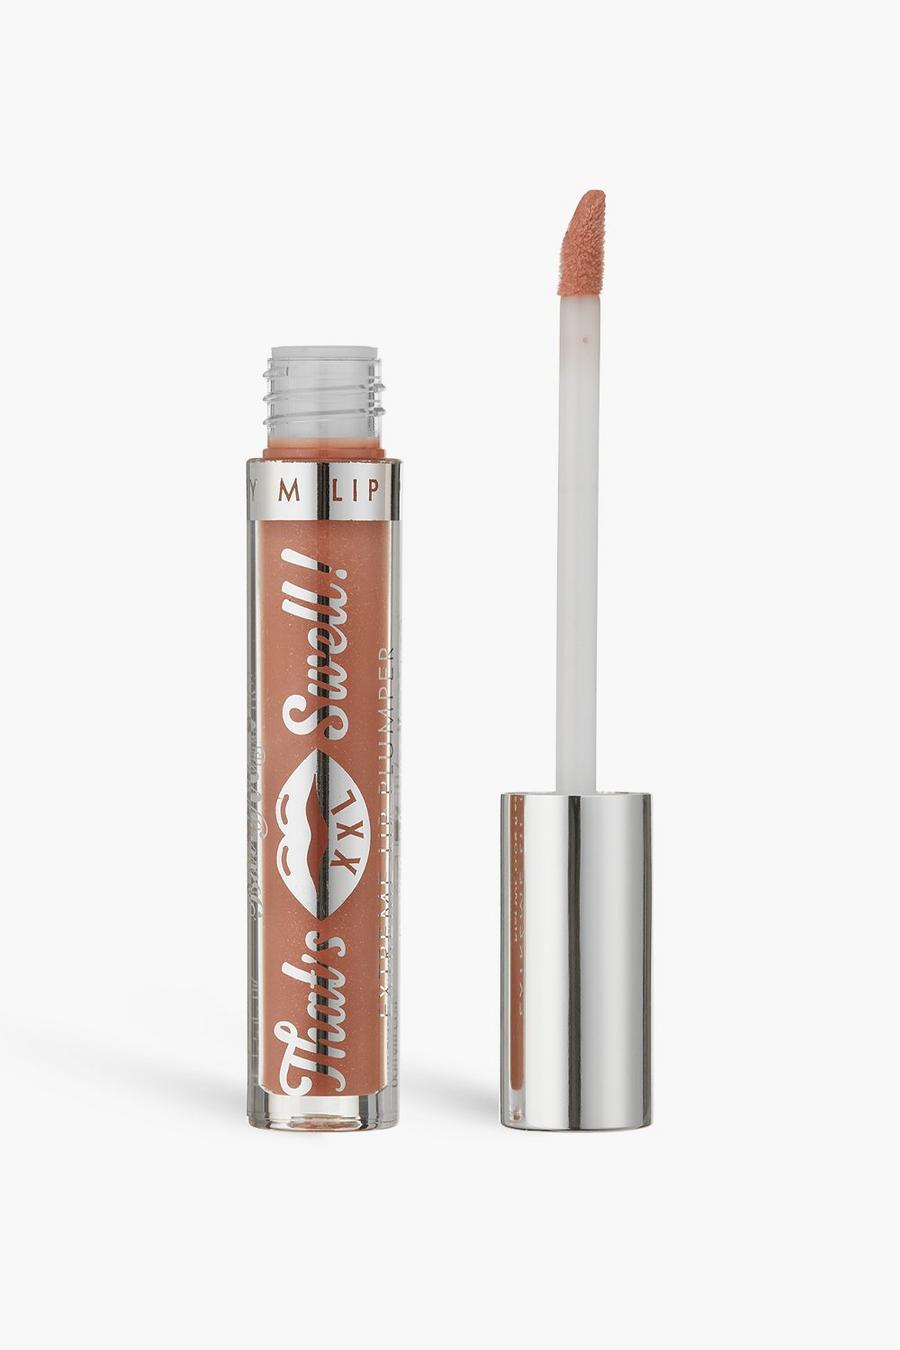 Nude Barry M That's Swell Tinted XXL Läppglans - A Mood image number 1